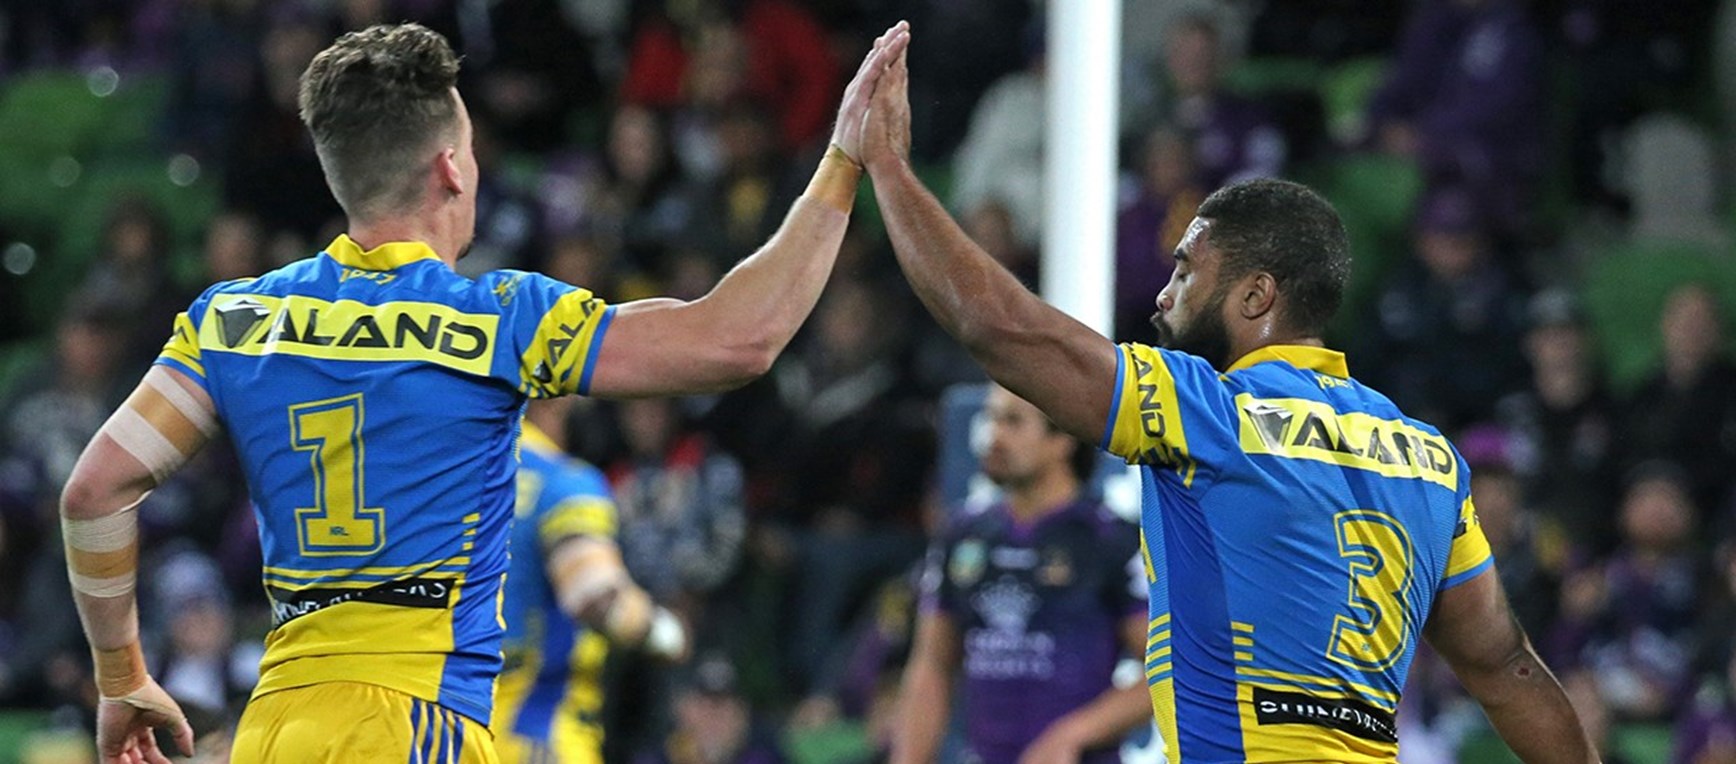 GALLERY | Eels v Storm, Round 18